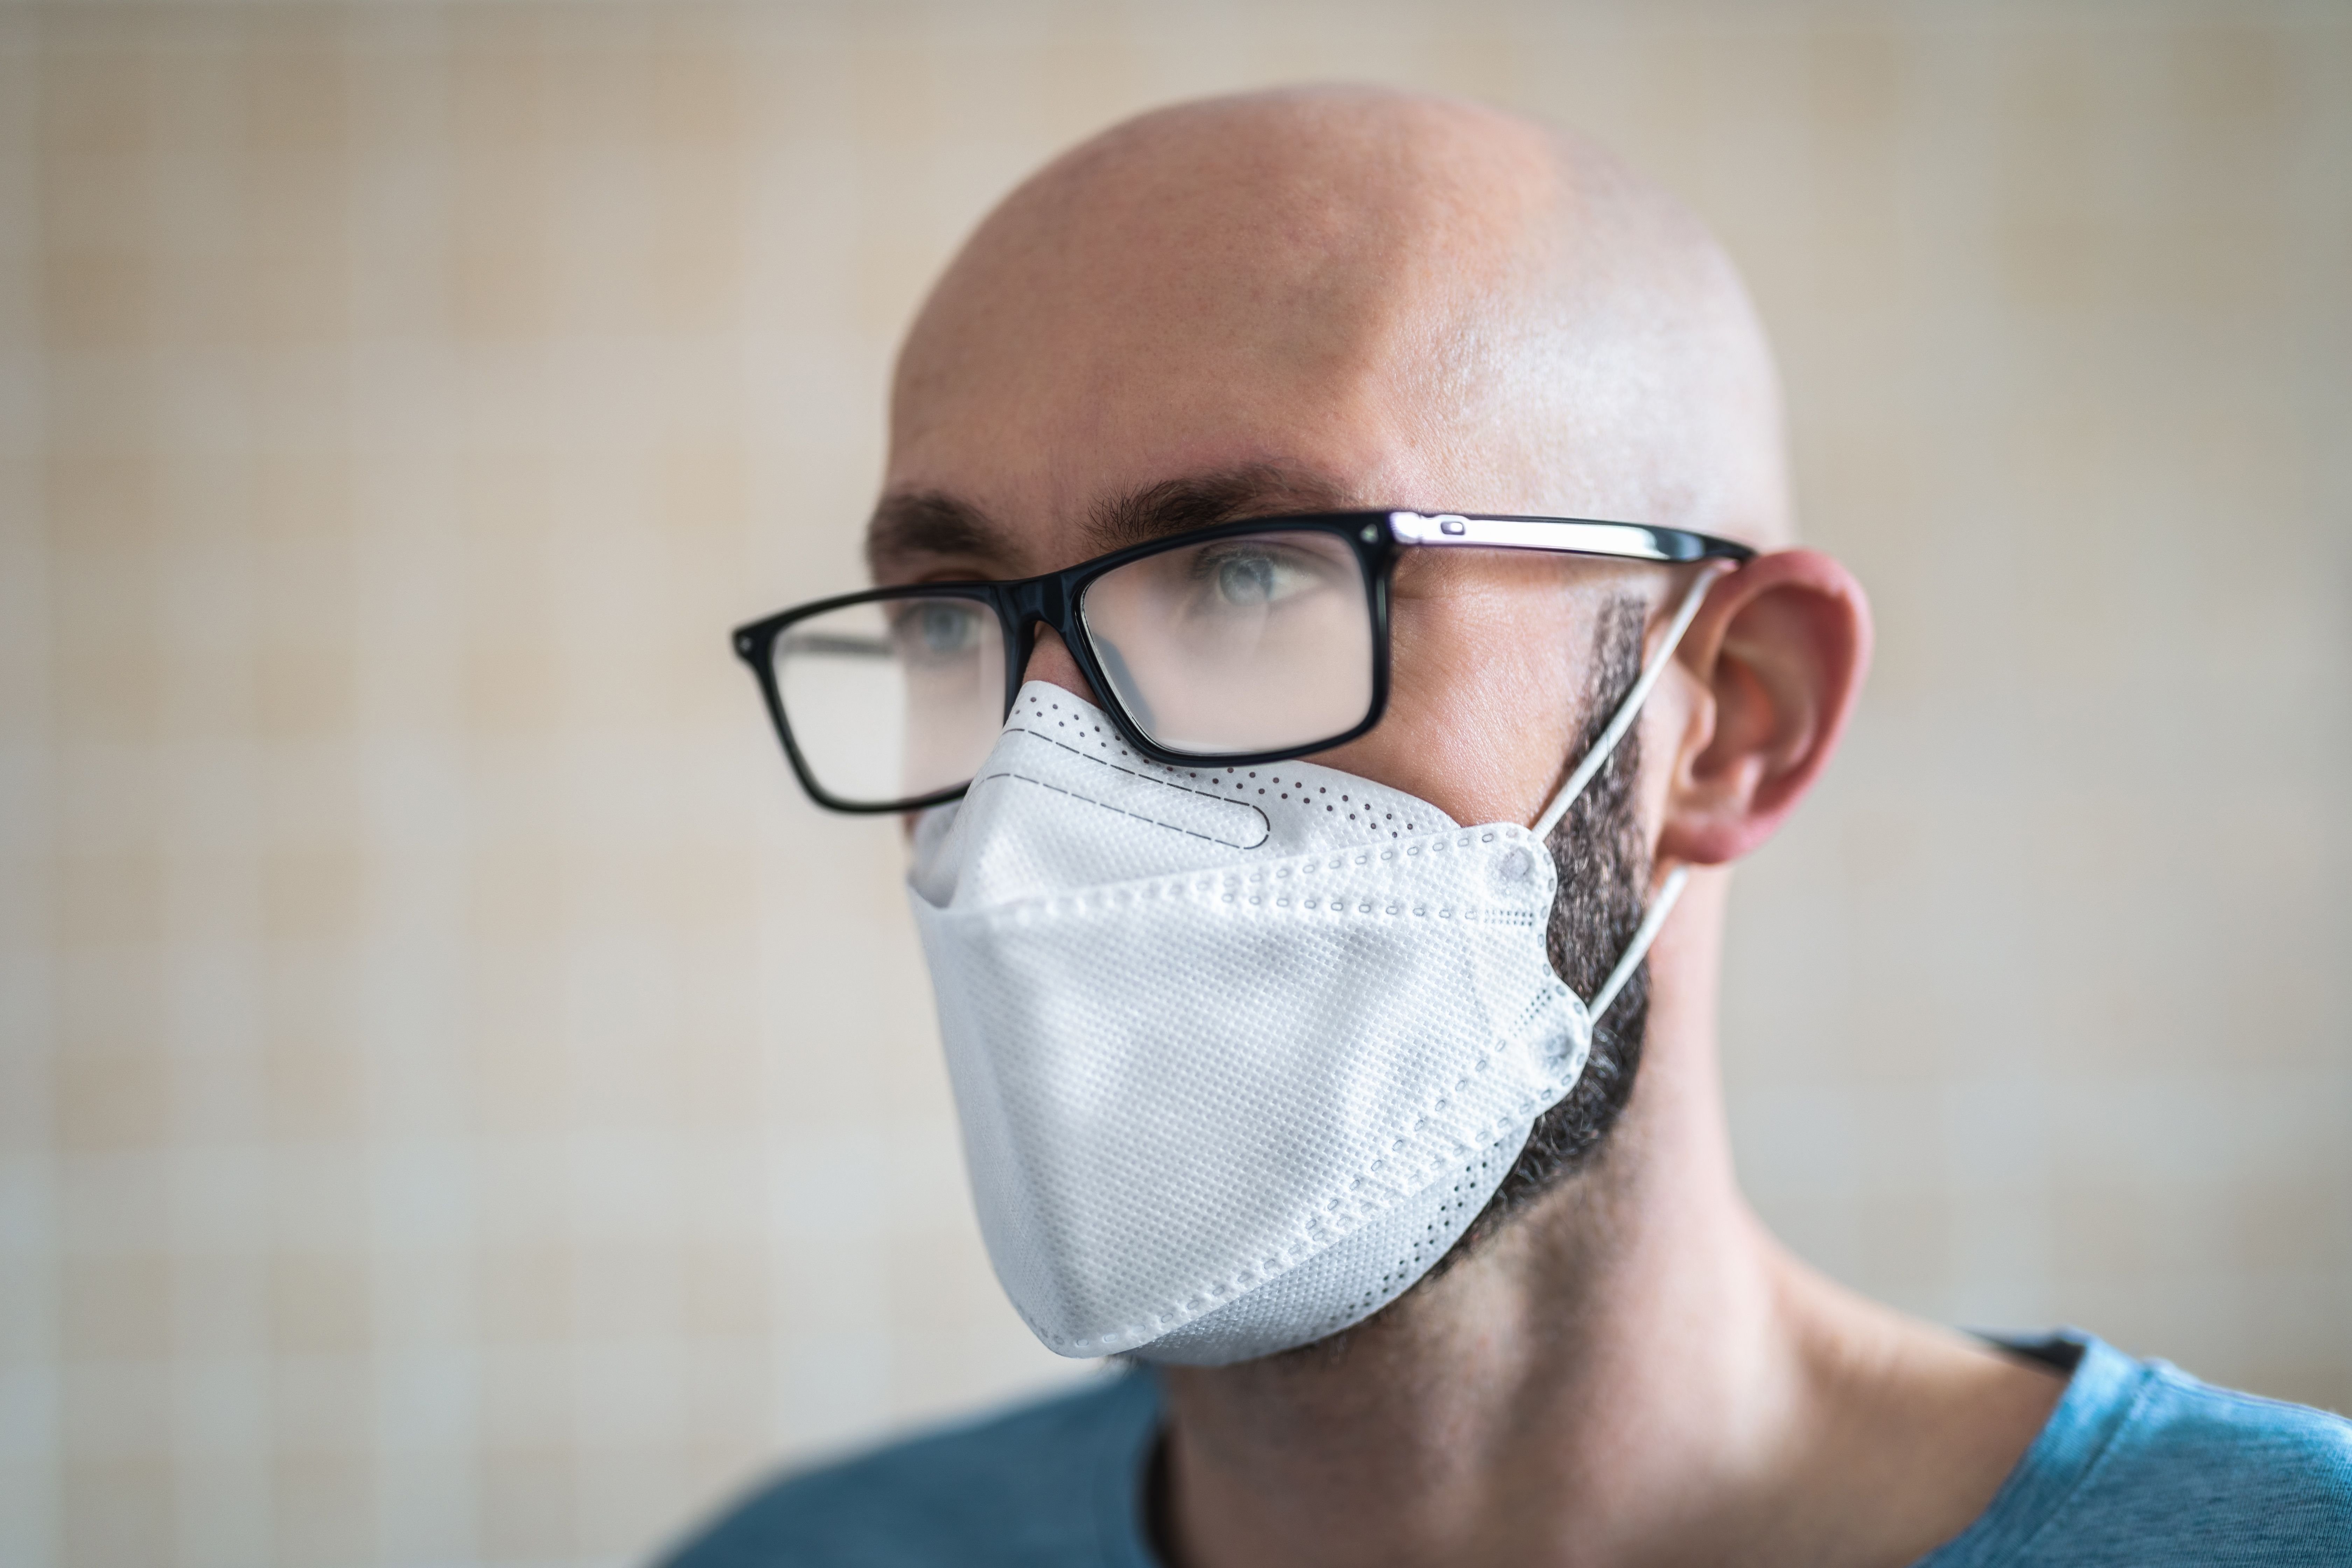 A man wearing glasses and a mask. | Source: Getty Images